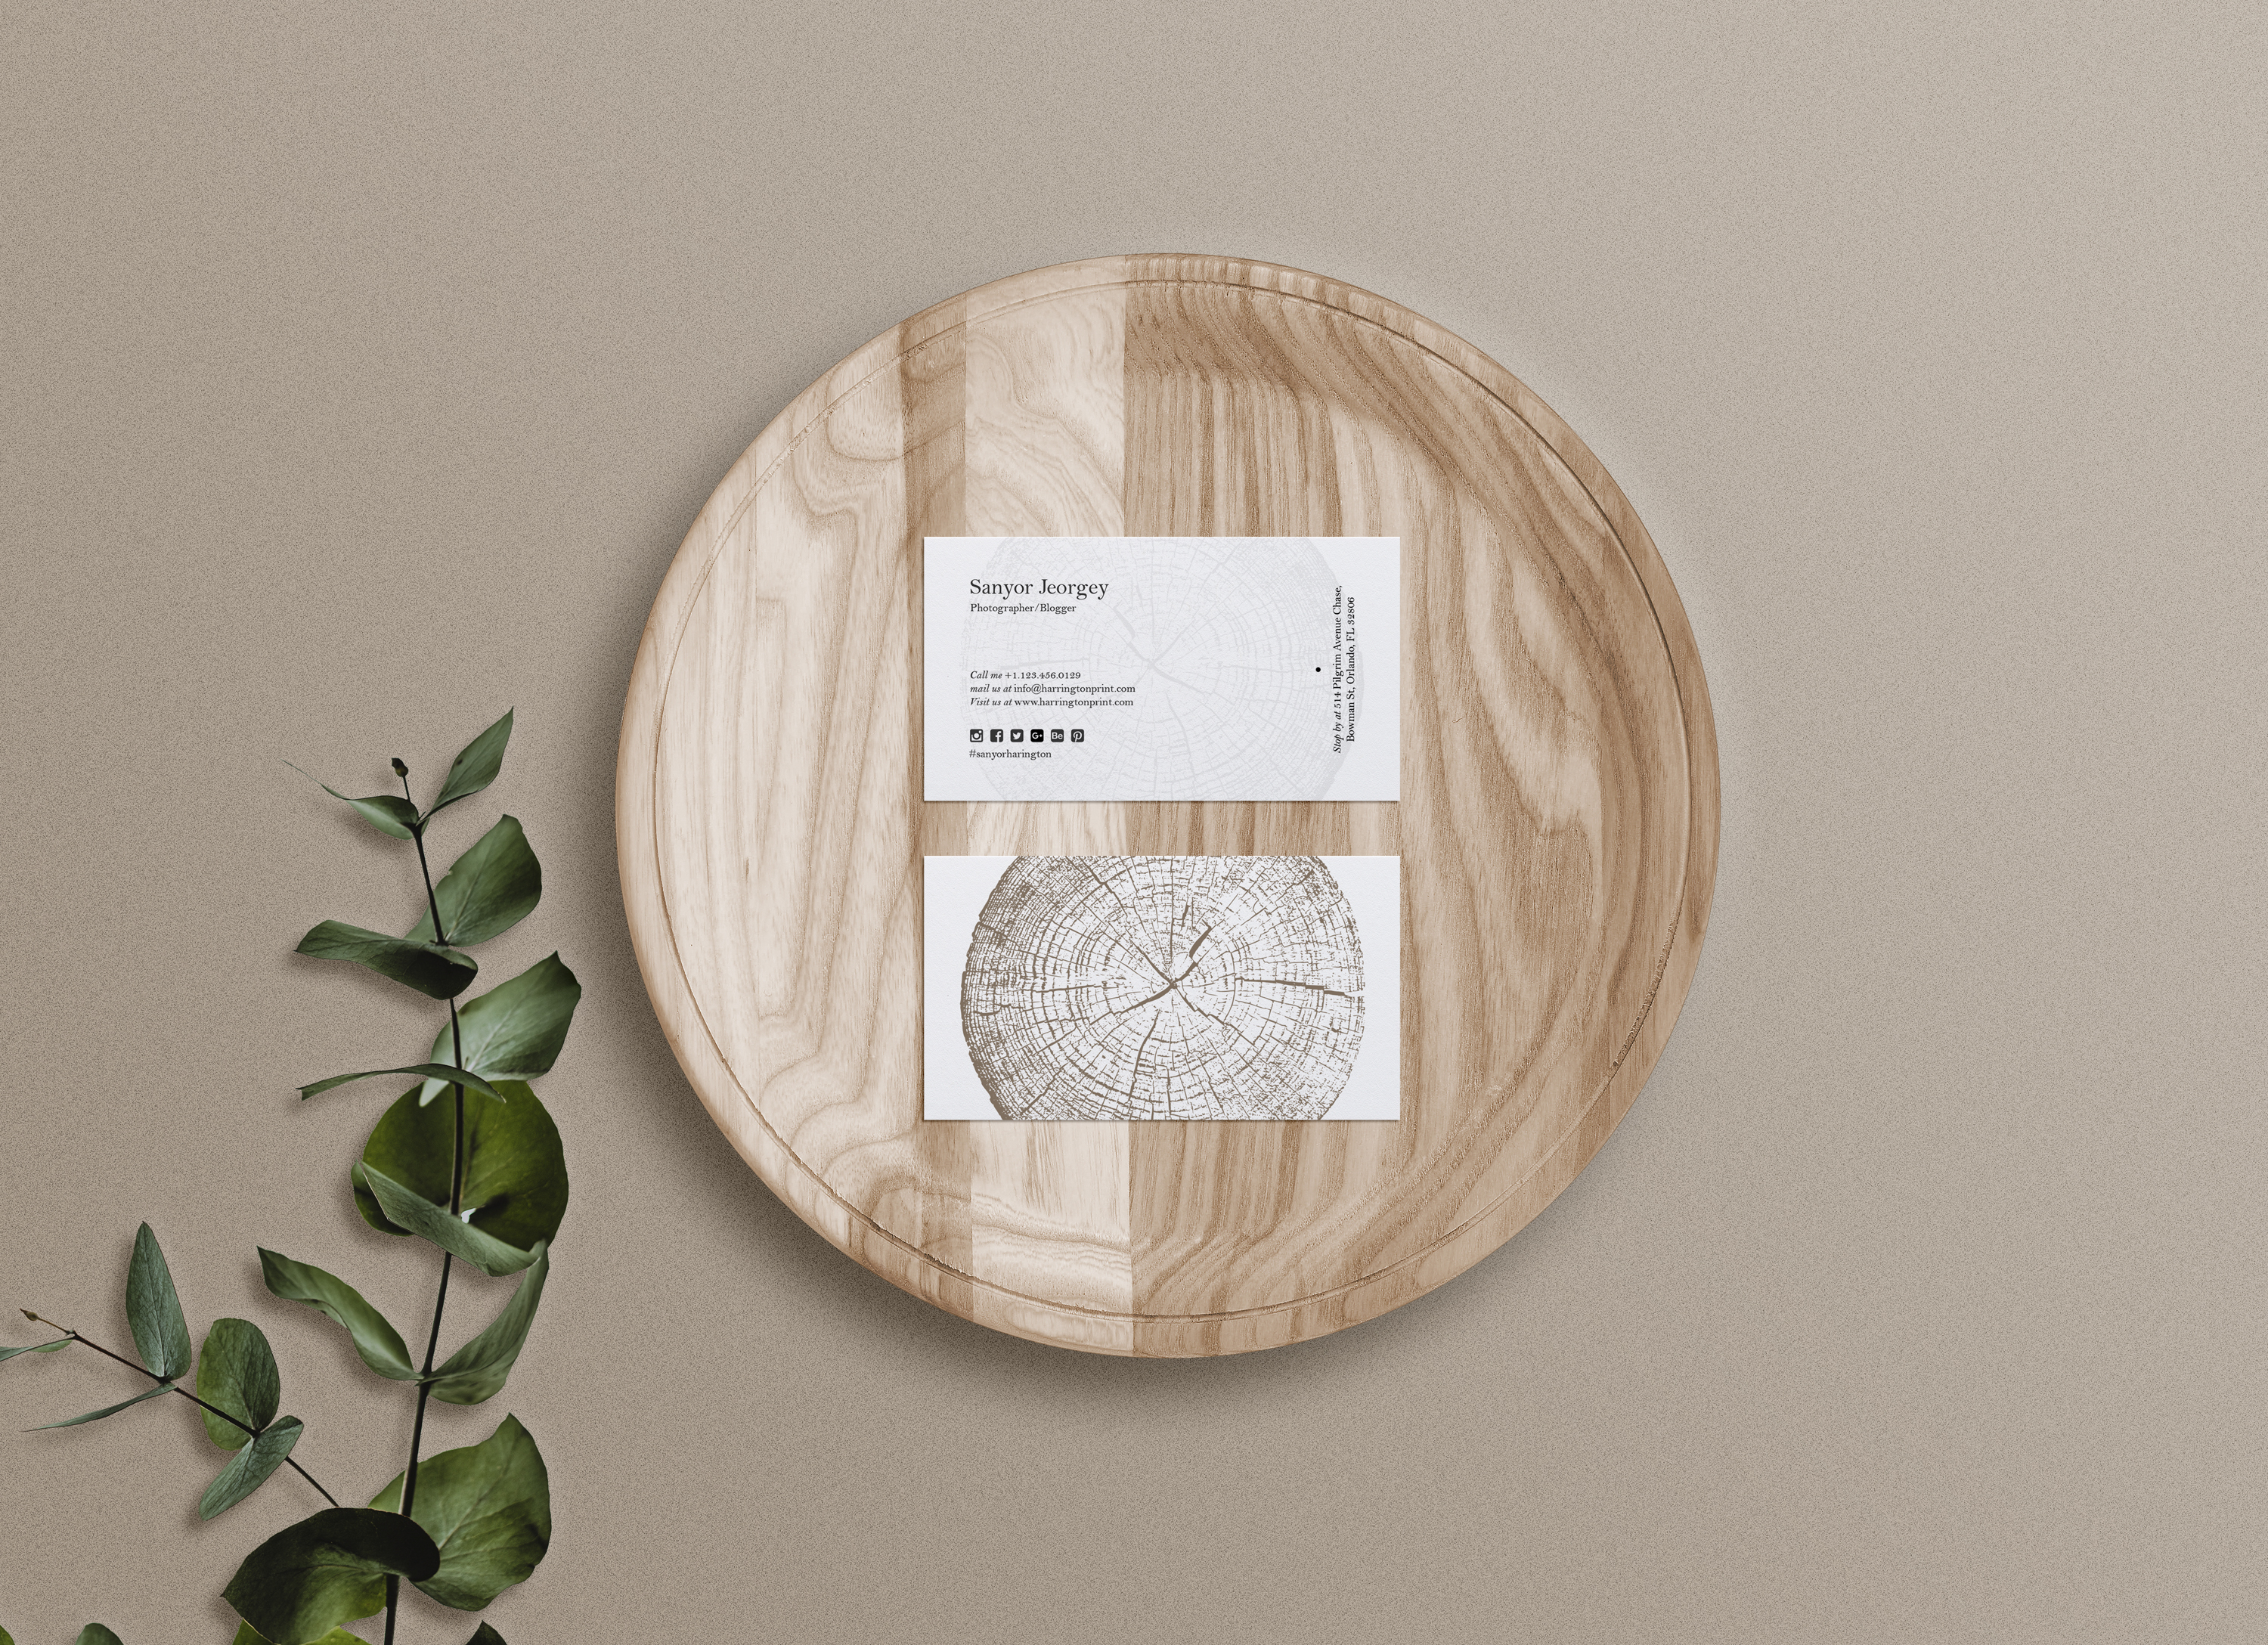 Download Business card mockup on wooden tray